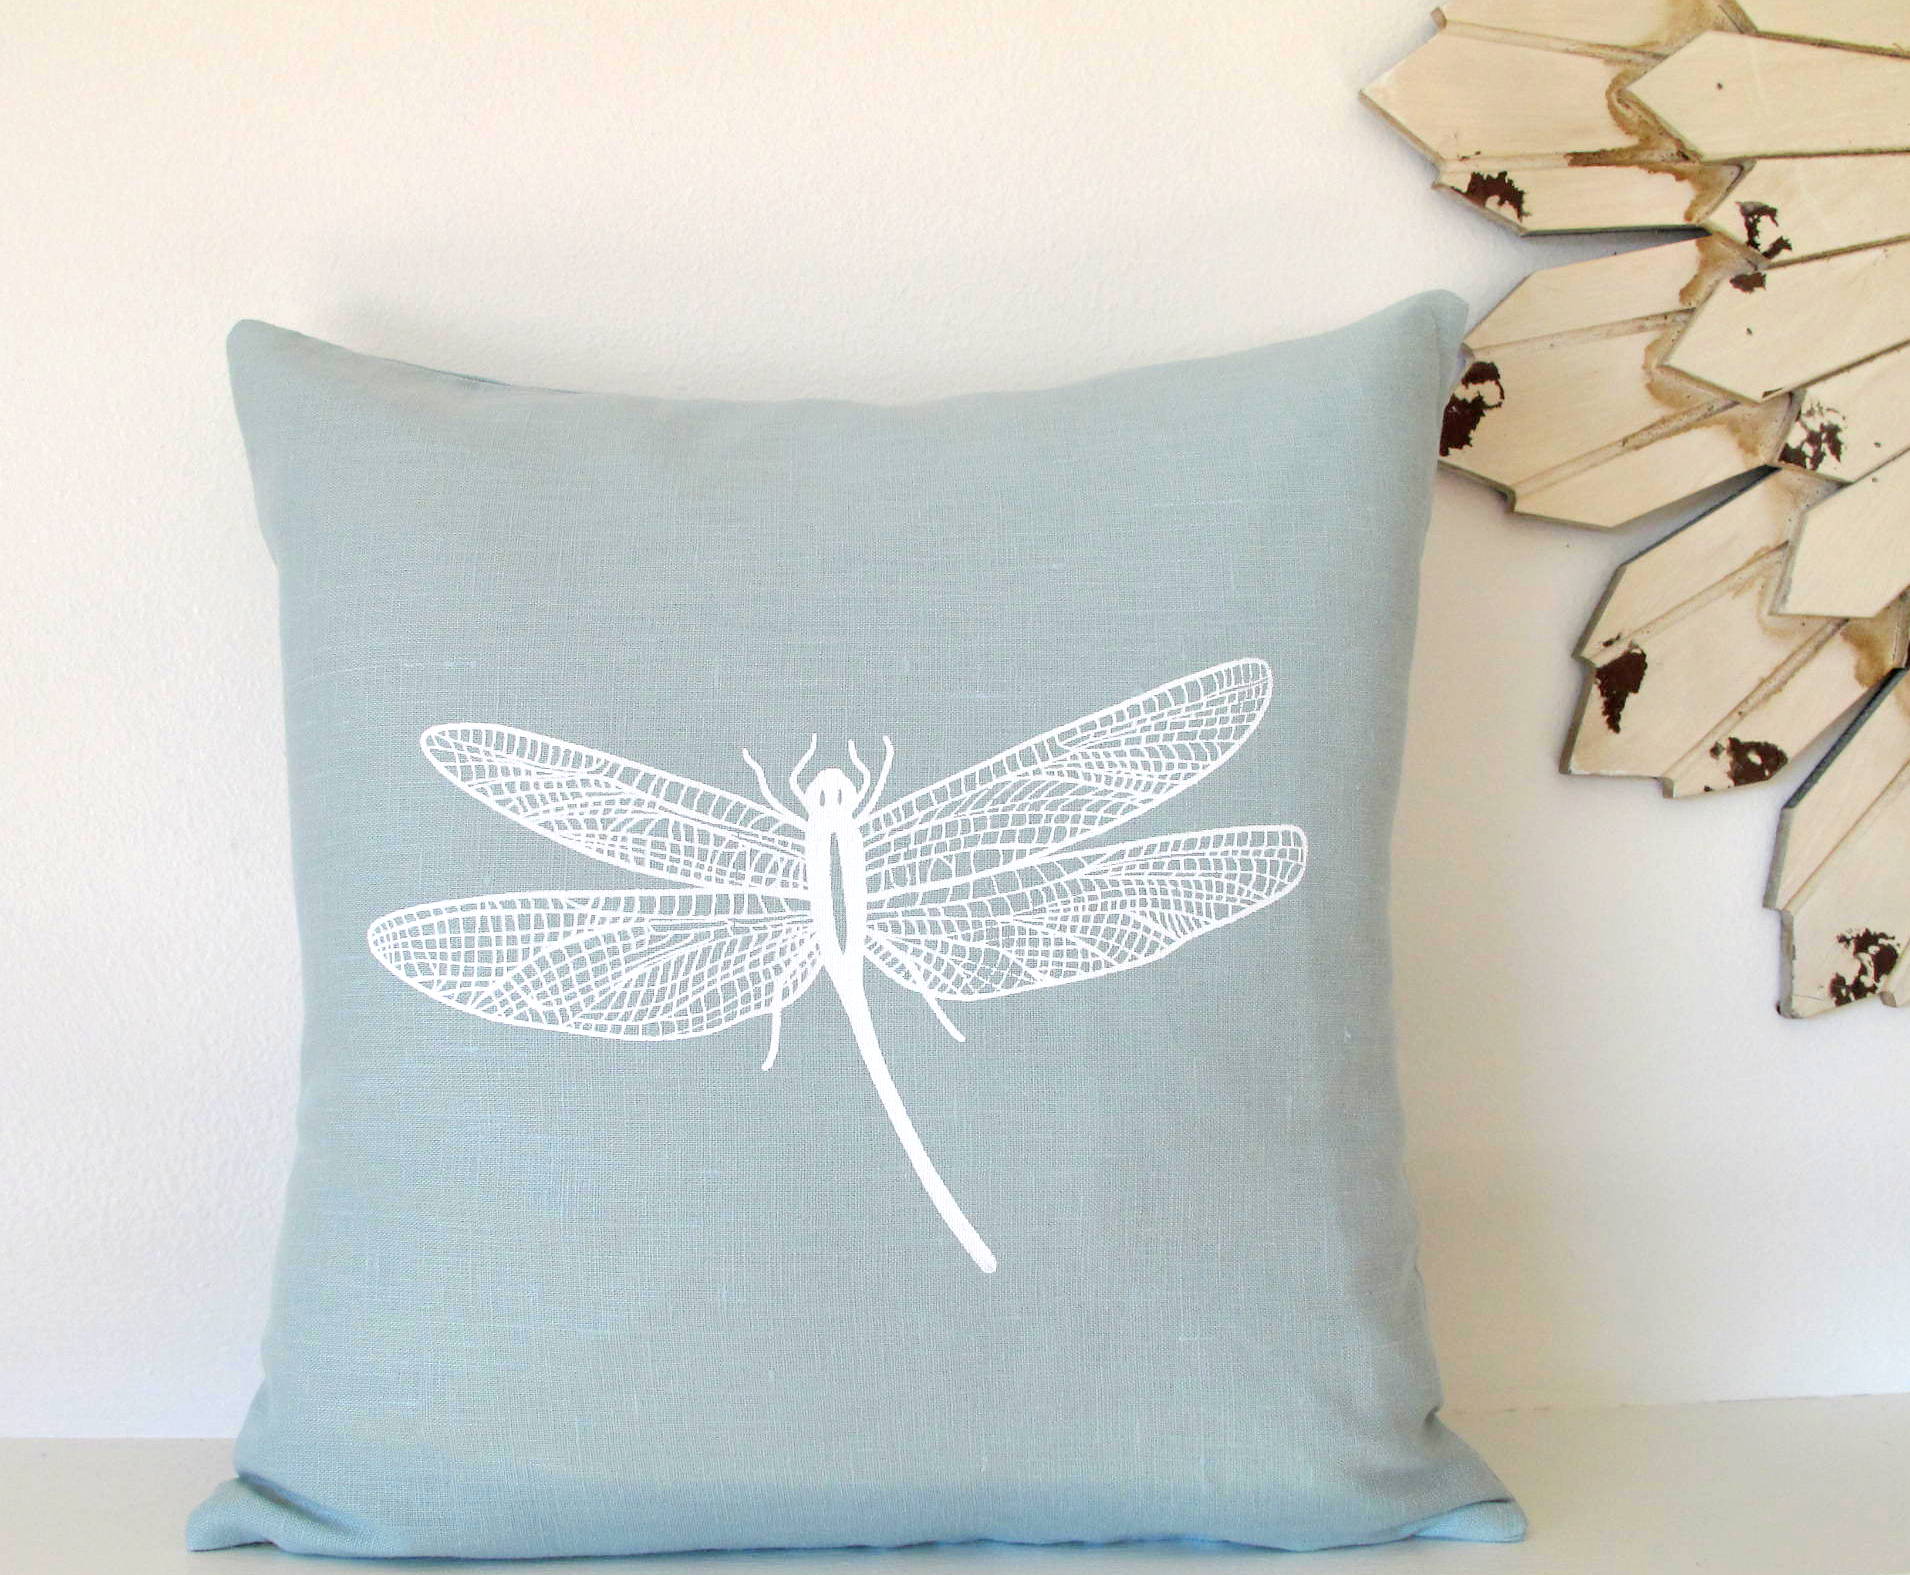 Elizabeth, Pillow Cover with Dragonfly Screen Print